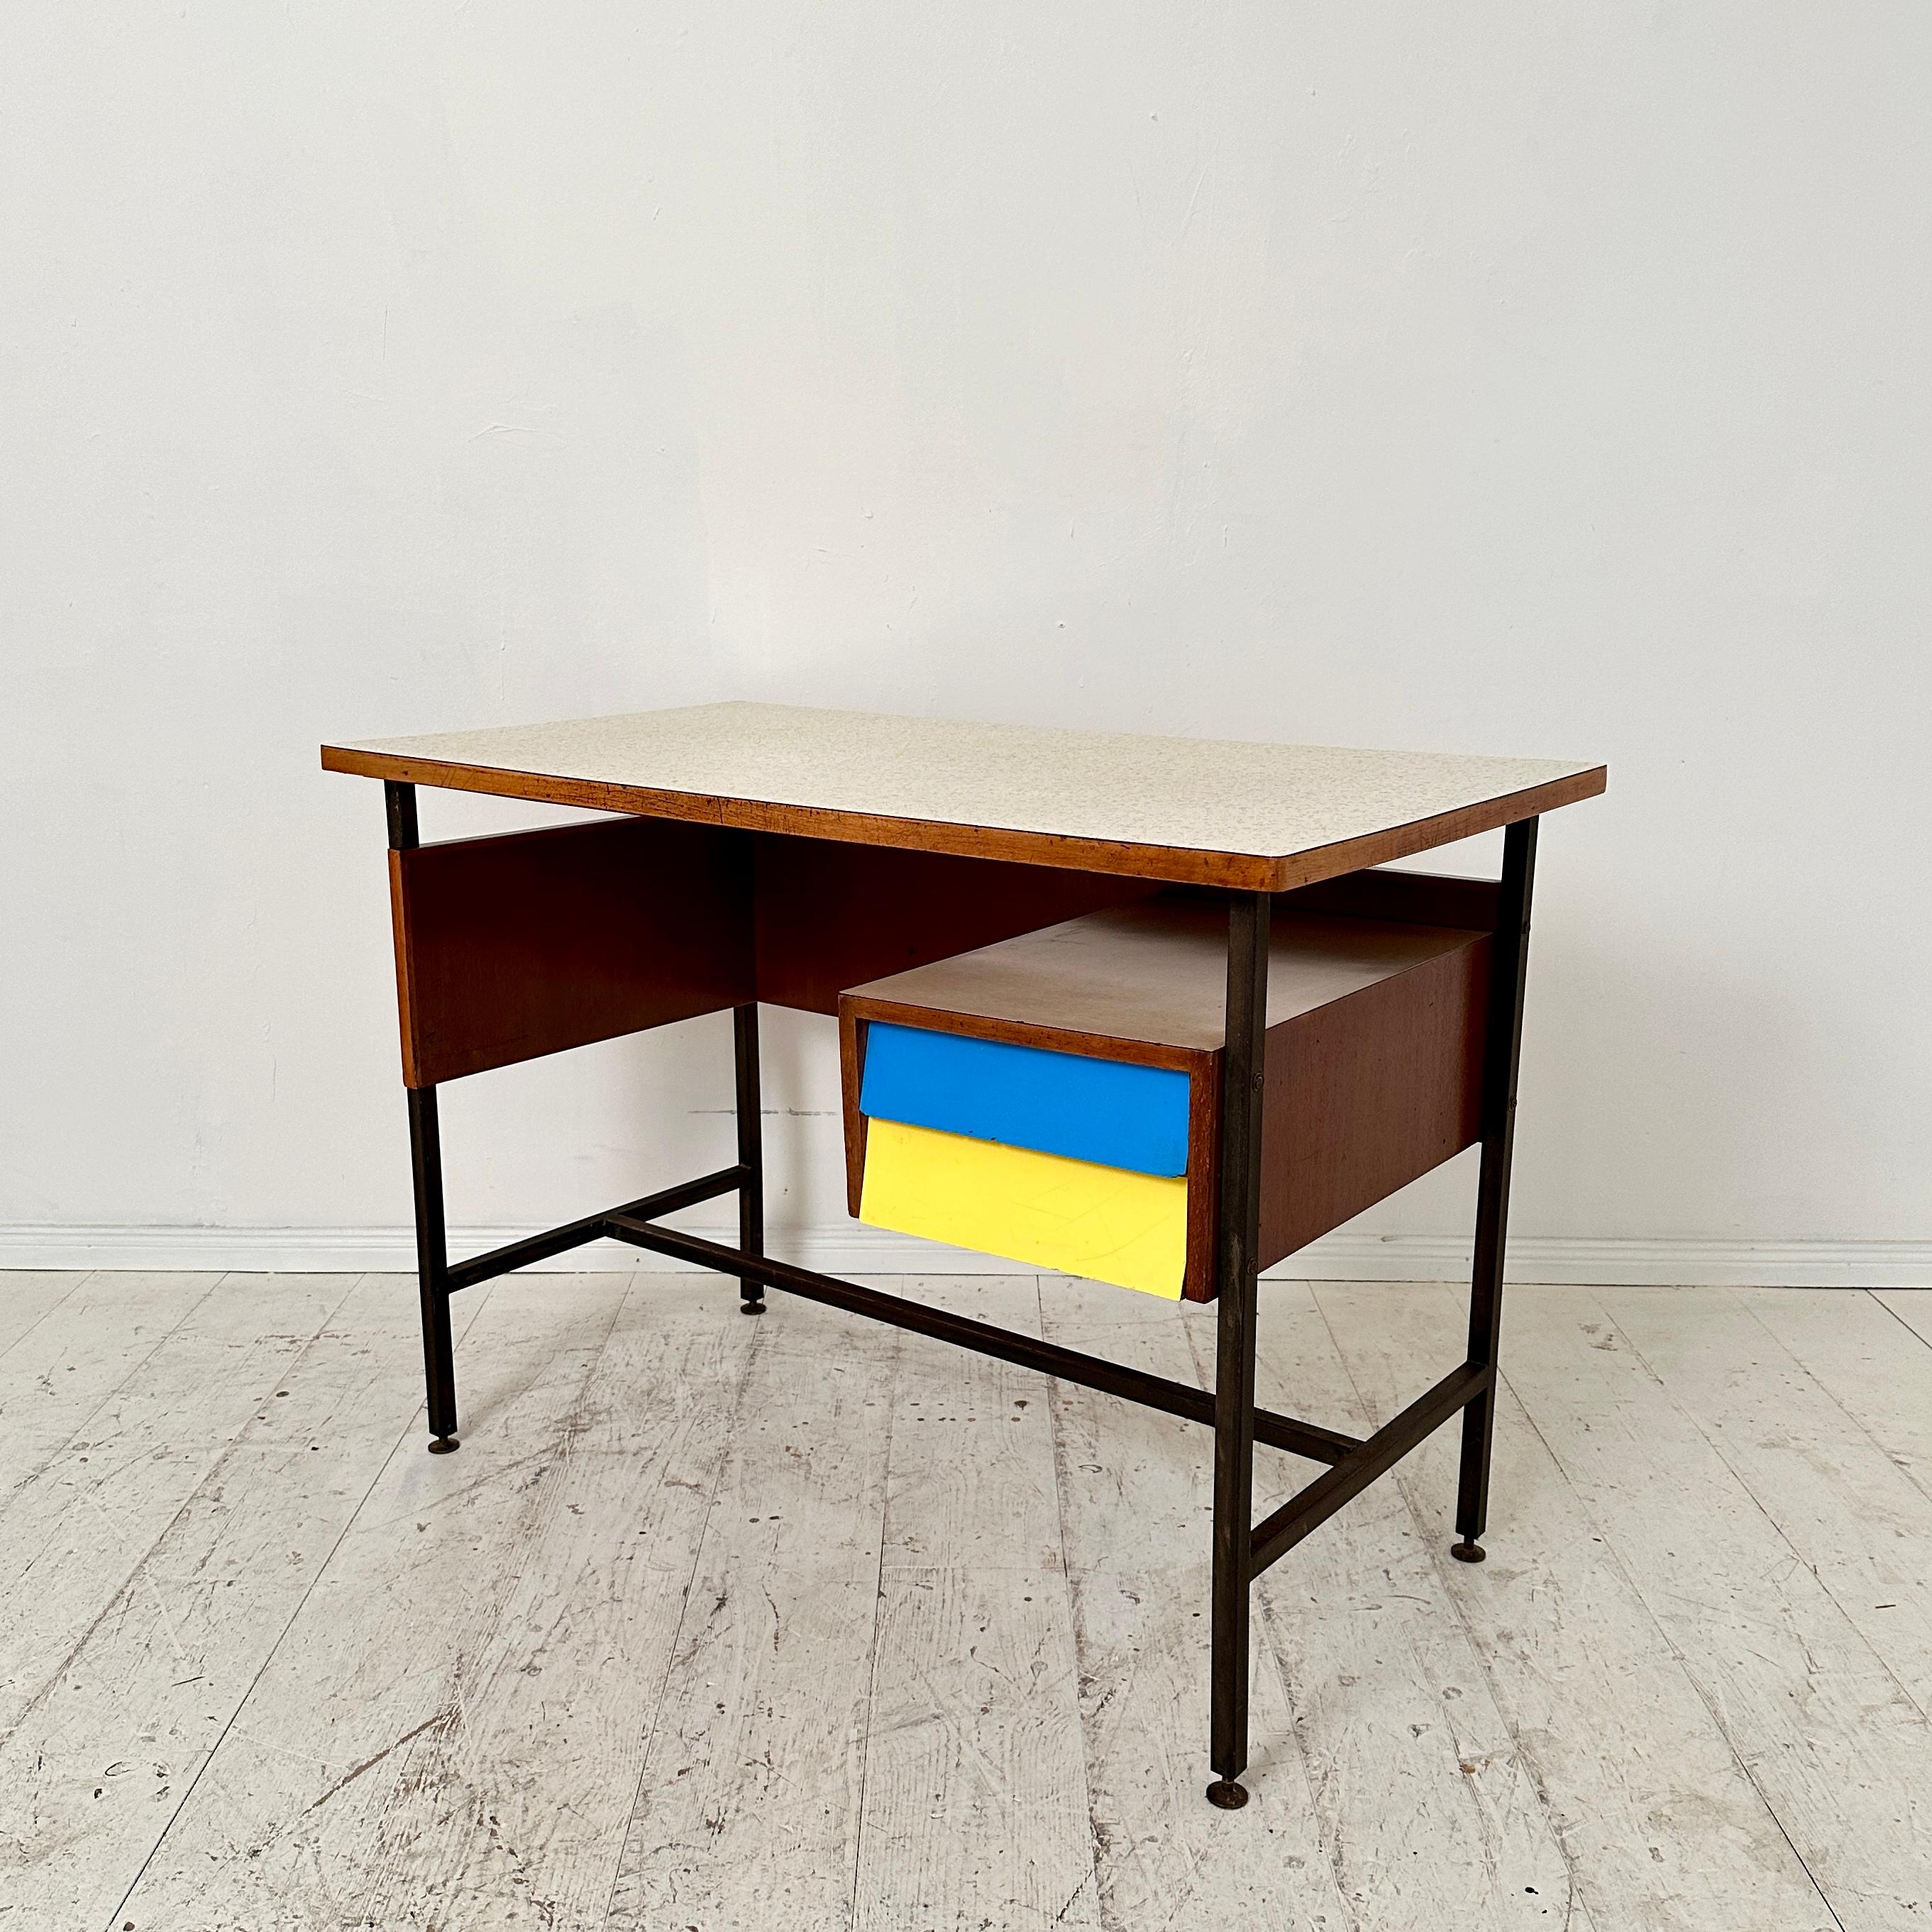 Small Mid Century Italian Desk in Metal, Walnut and Formica, around 1950 For Sale 1